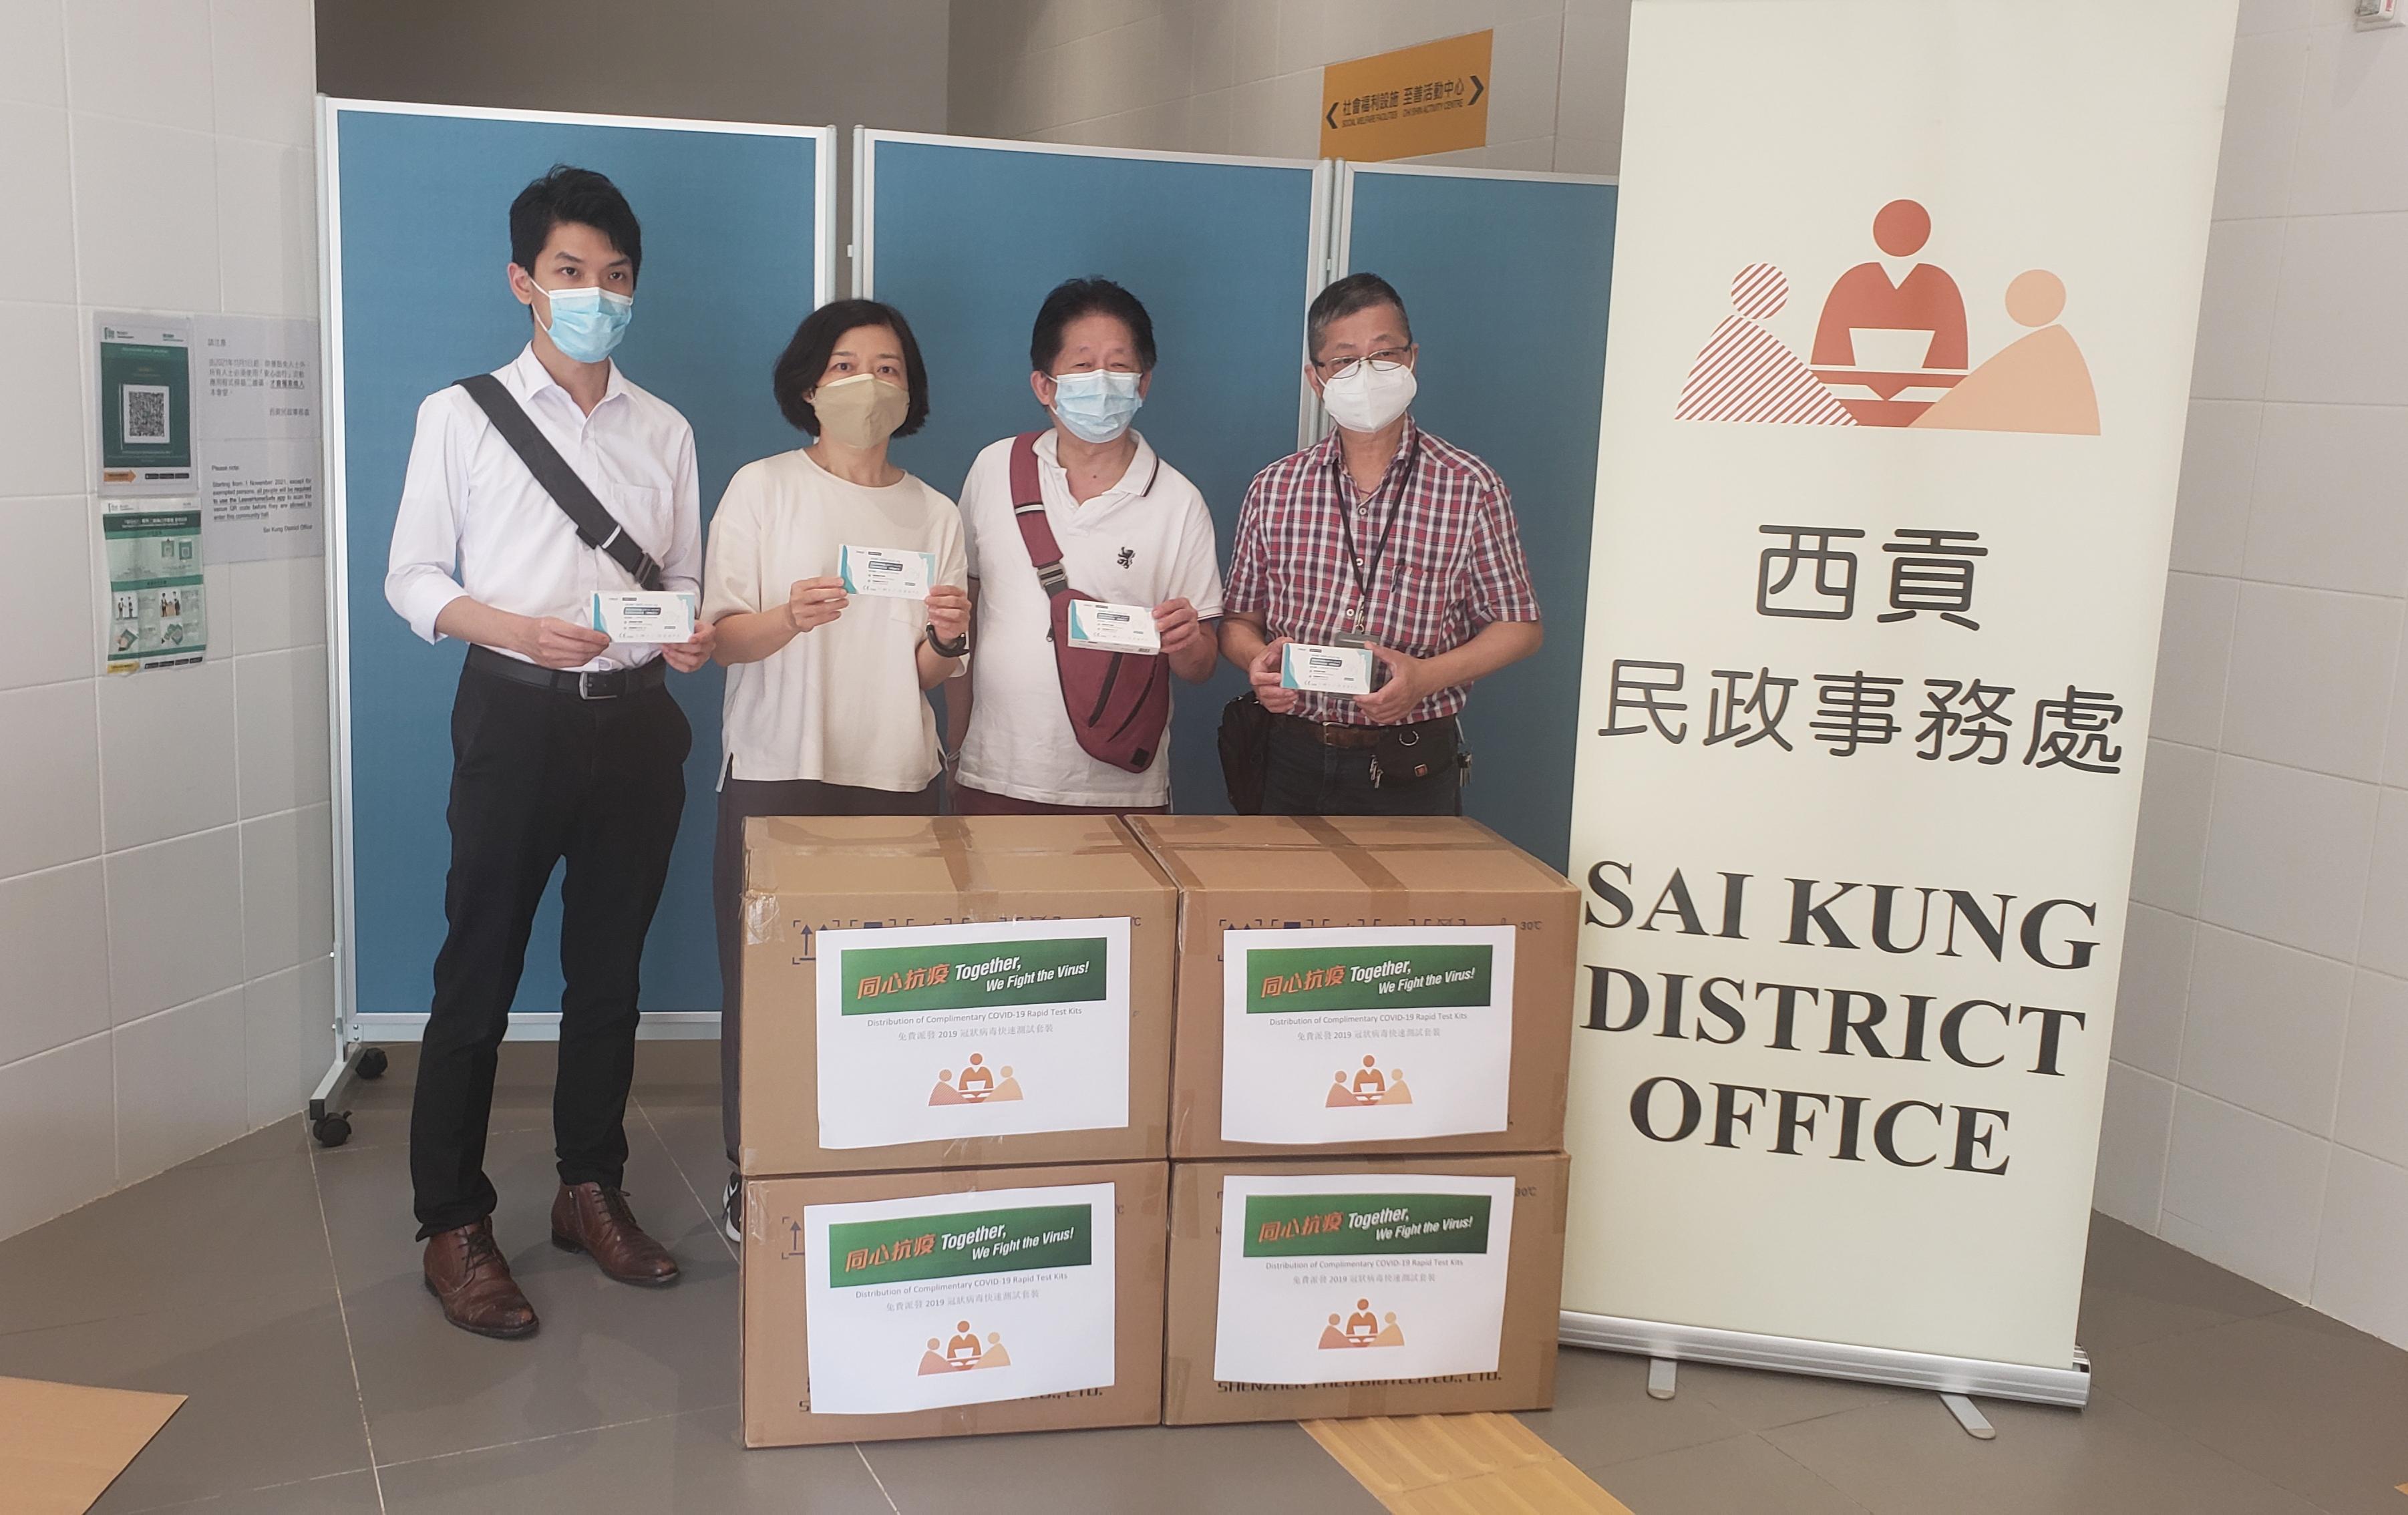 The Sai Kung District Office today (May 1) distributed COVID-19 rapid test kits to households, cleansing workers and property management staff living and working in Tsui Lam Estate for voluntary testing through the property management company and the owners' corporation.